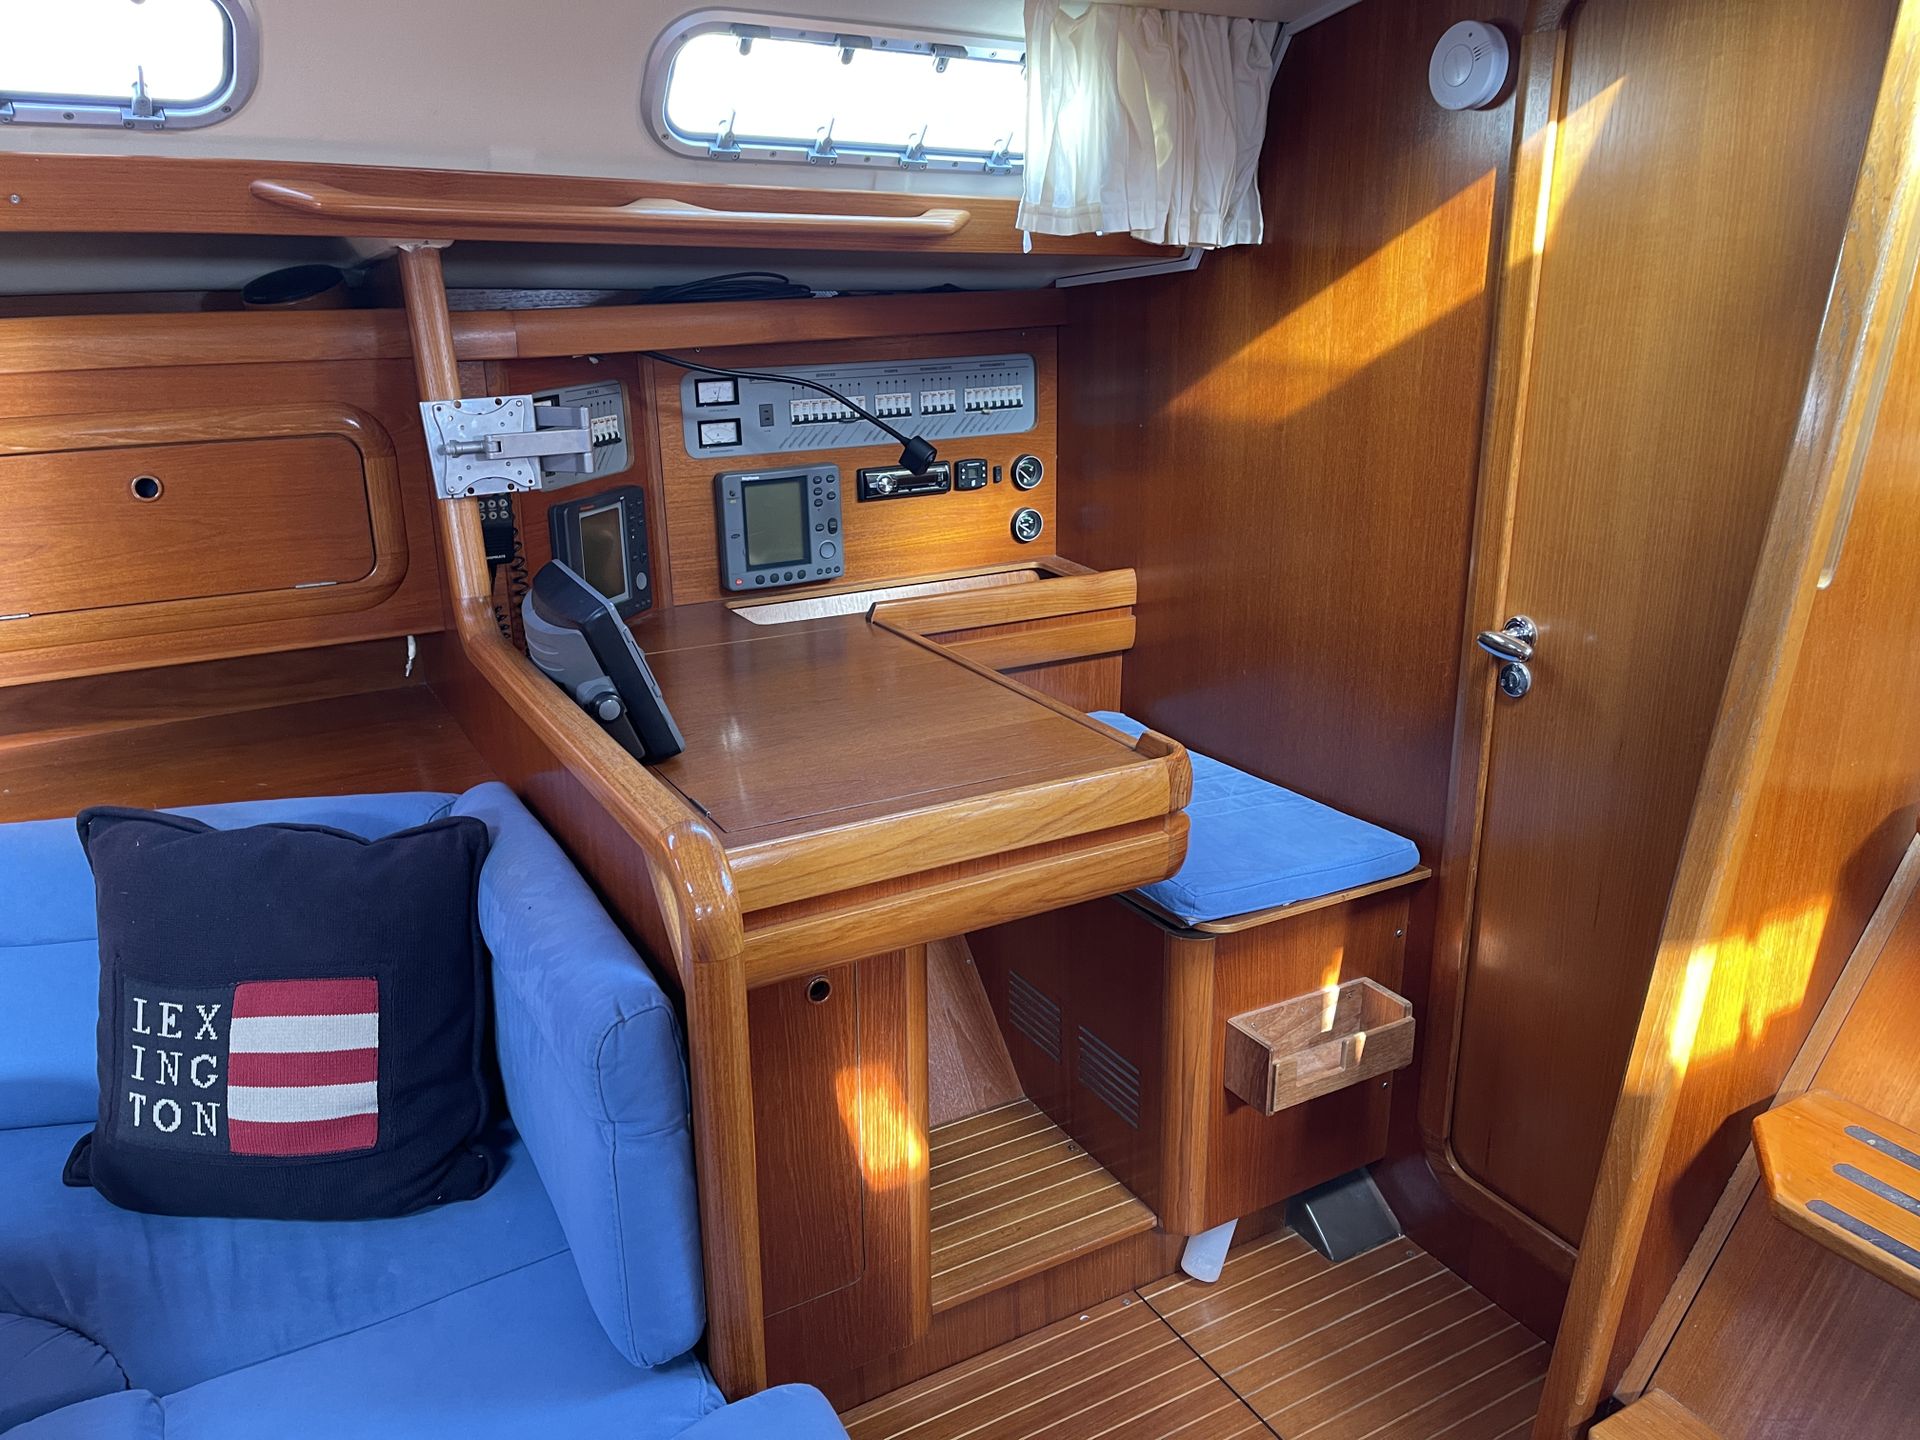 Grand Soleil 46.3 - 3 cabins - 2 owners and renovated teak deck #46